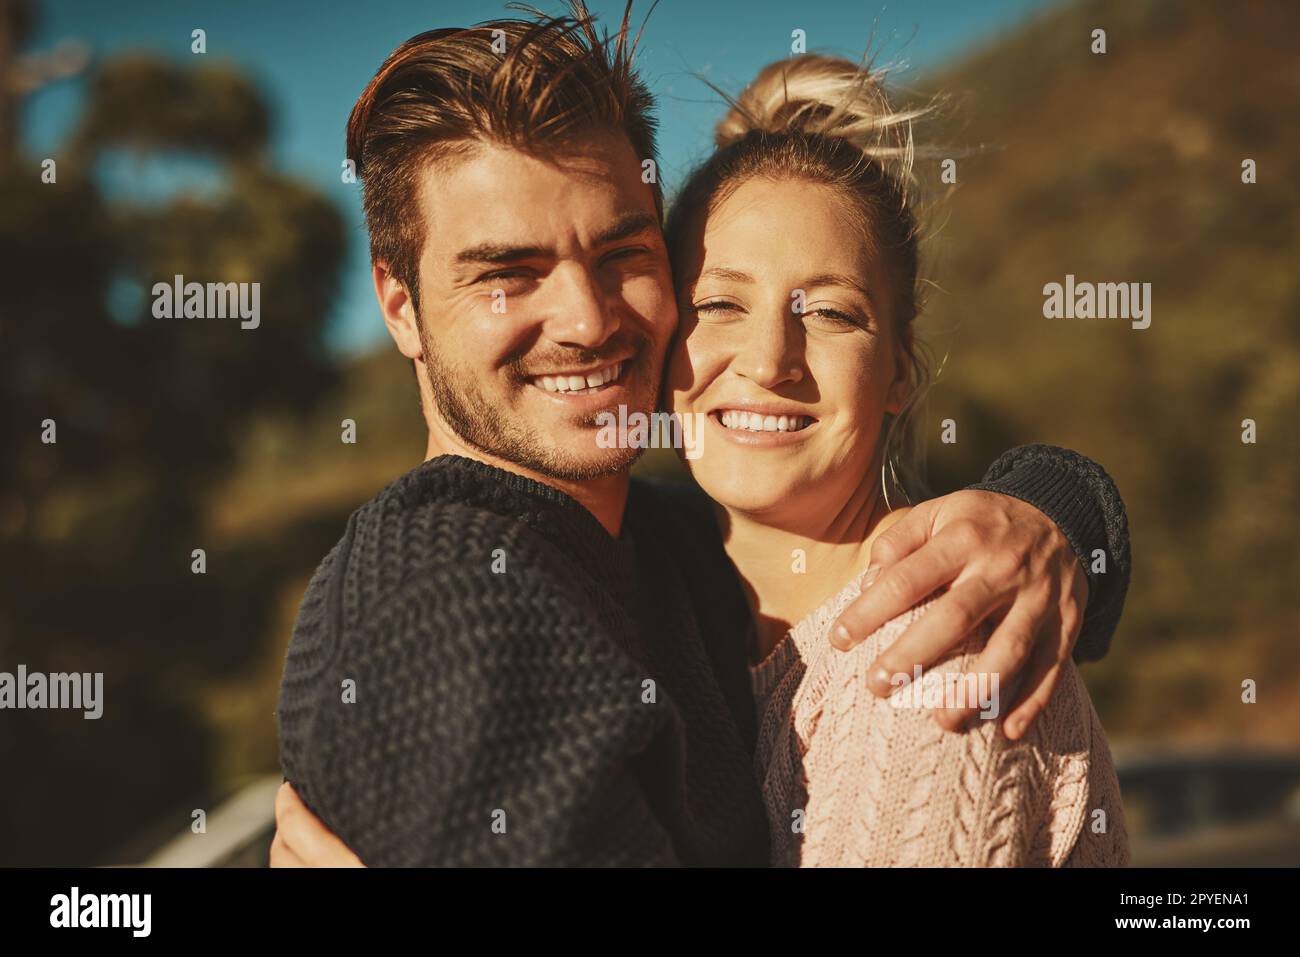 We love being outdoors. an affectionate couple spending the day outdoors. Stock Photo